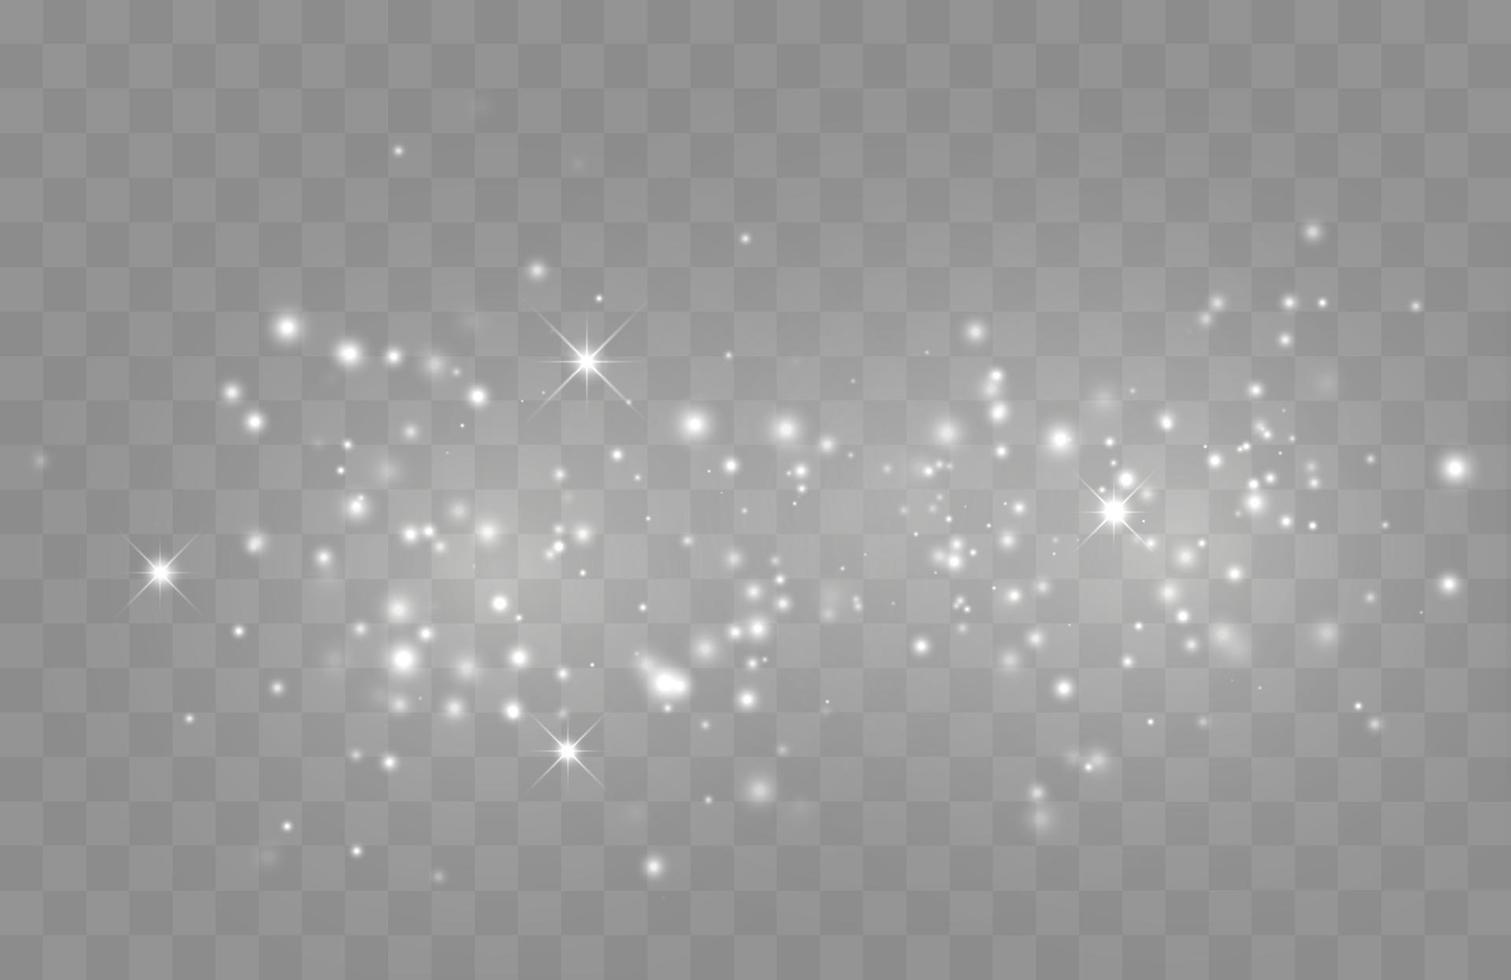 Bokeh lights isolated. Transparent blurred shapes. Abstract light effect. vector